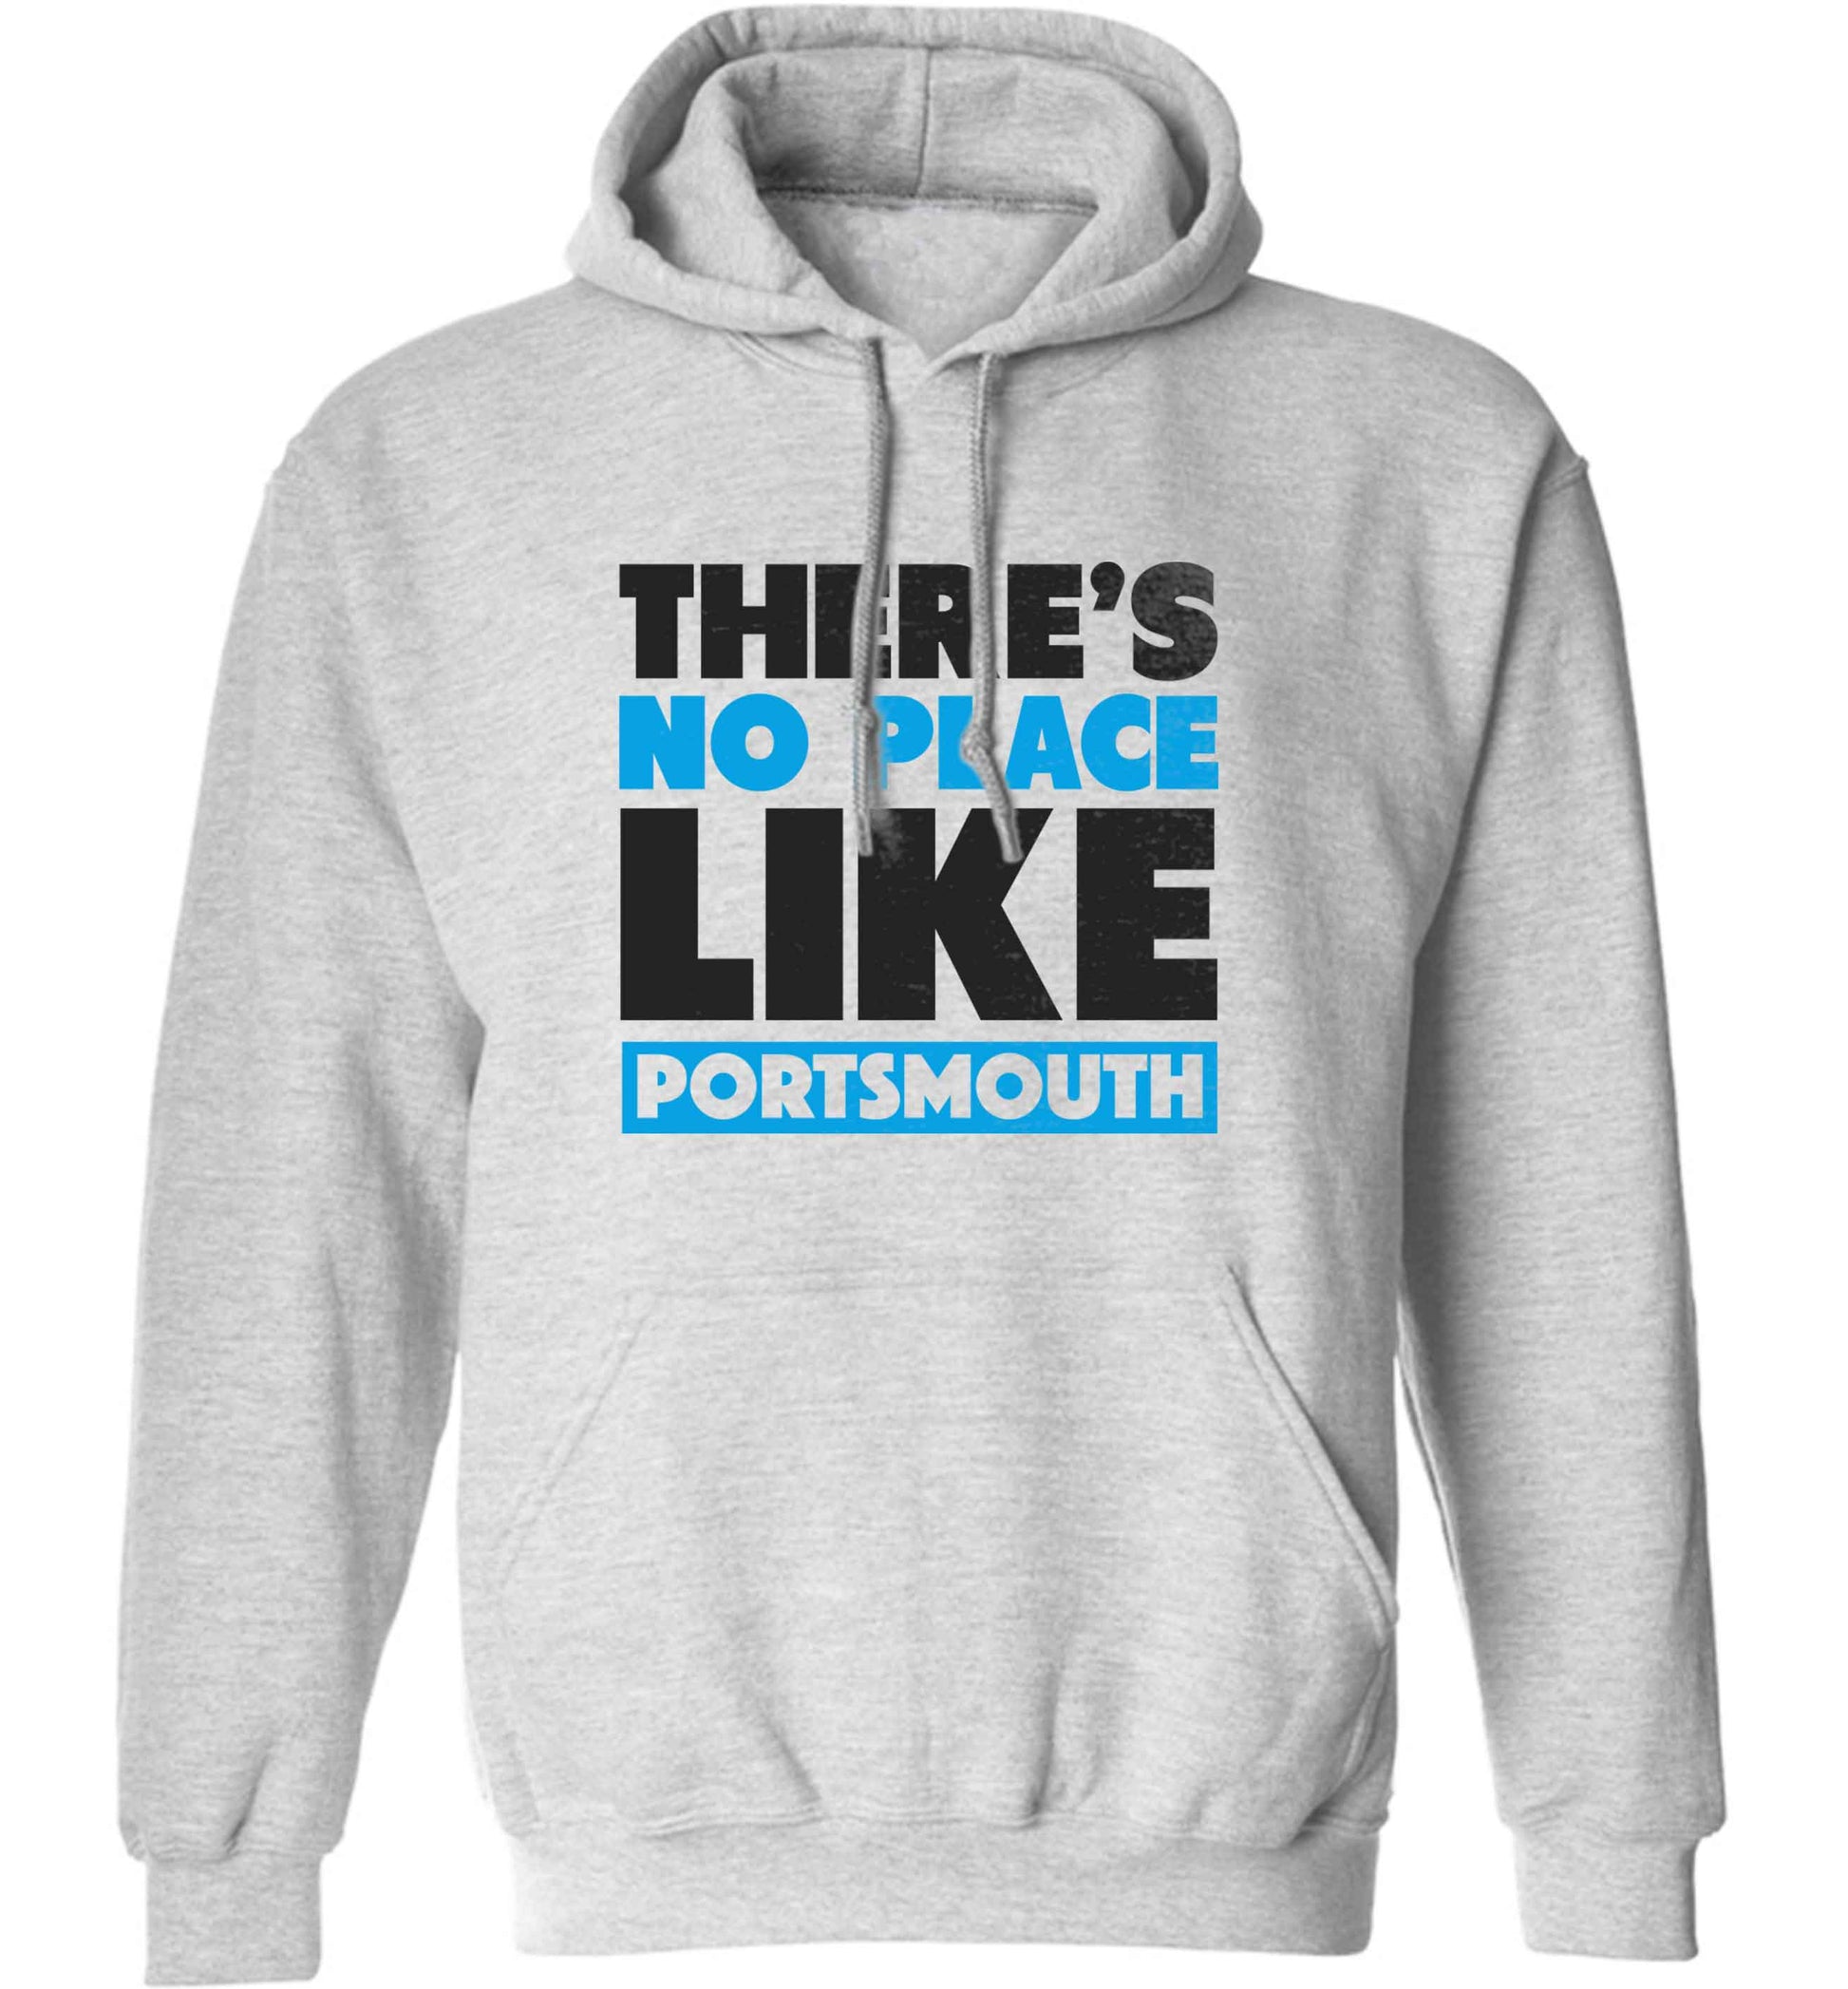 There's no place like Porstmouth adults unisex grey hoodie 2XL